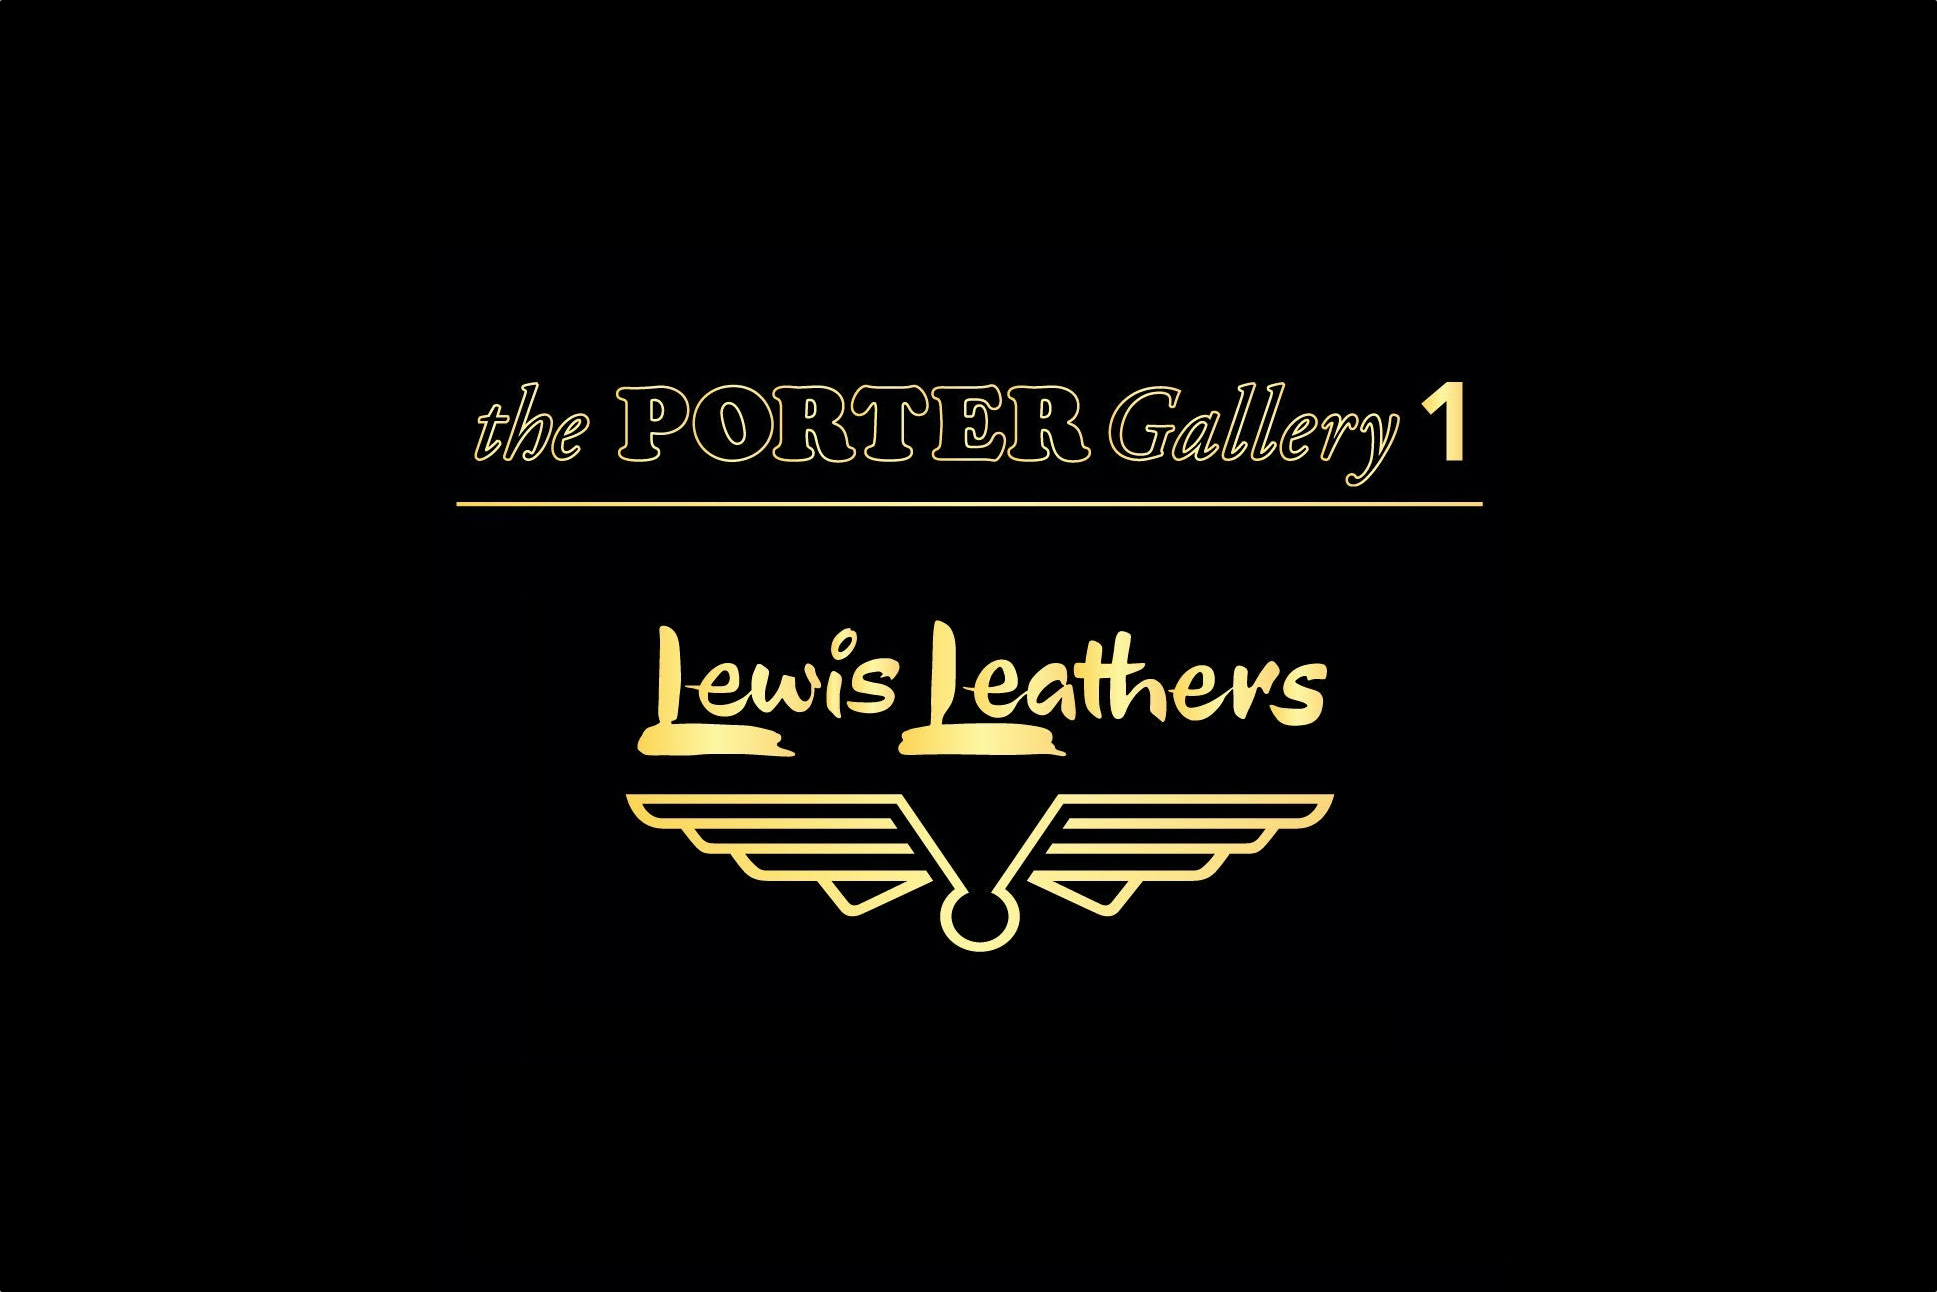 LEWIS LEATHERS x PORTER コラボアイテム発売